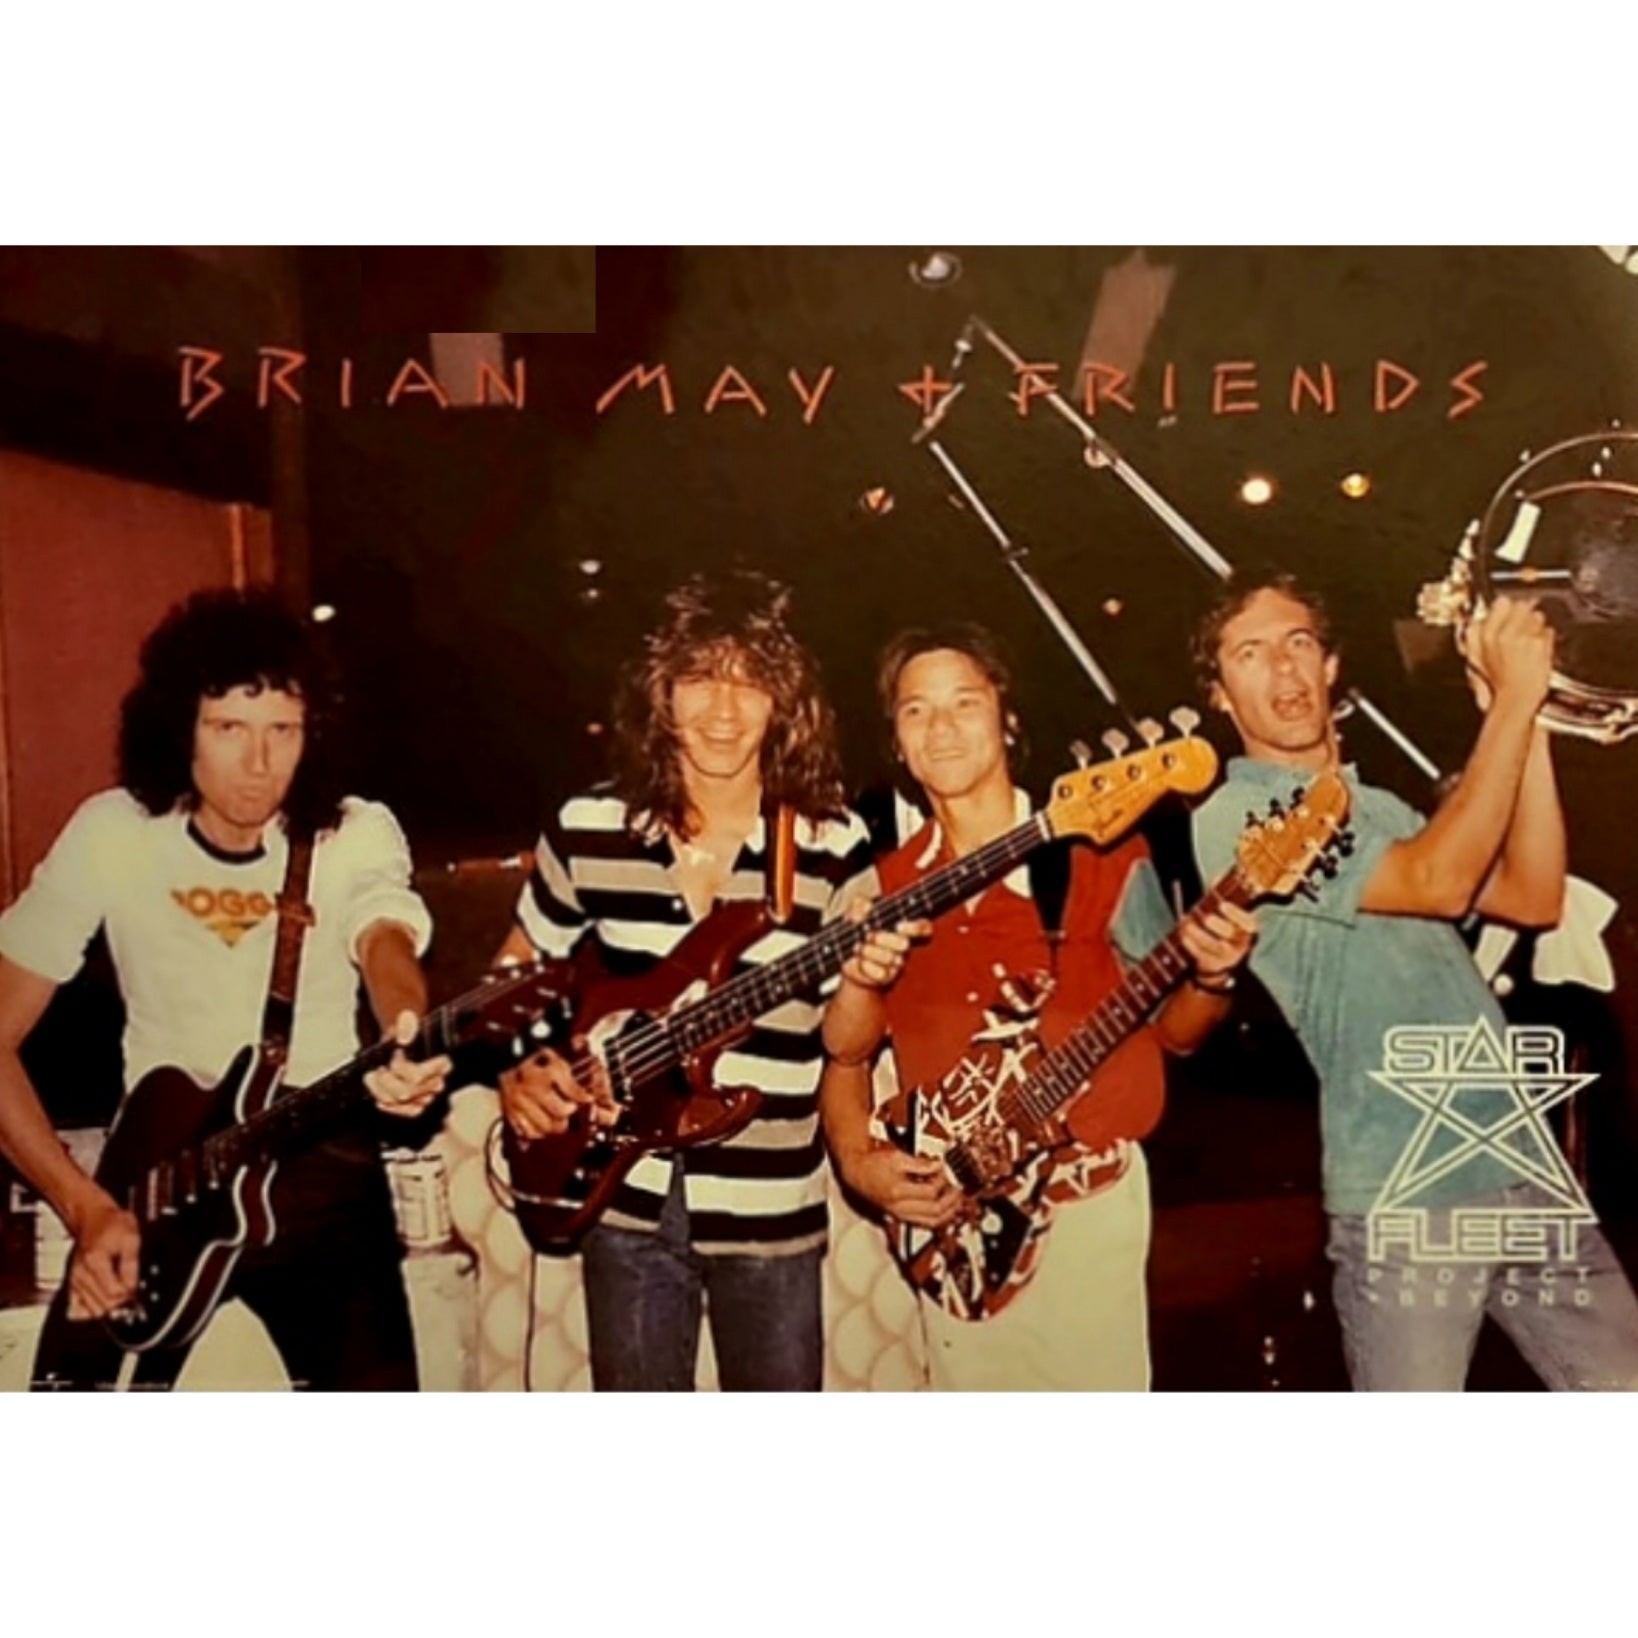 Brian_May_&_Friends_StarFleet_Sessions_SHM-CD_with_Poster